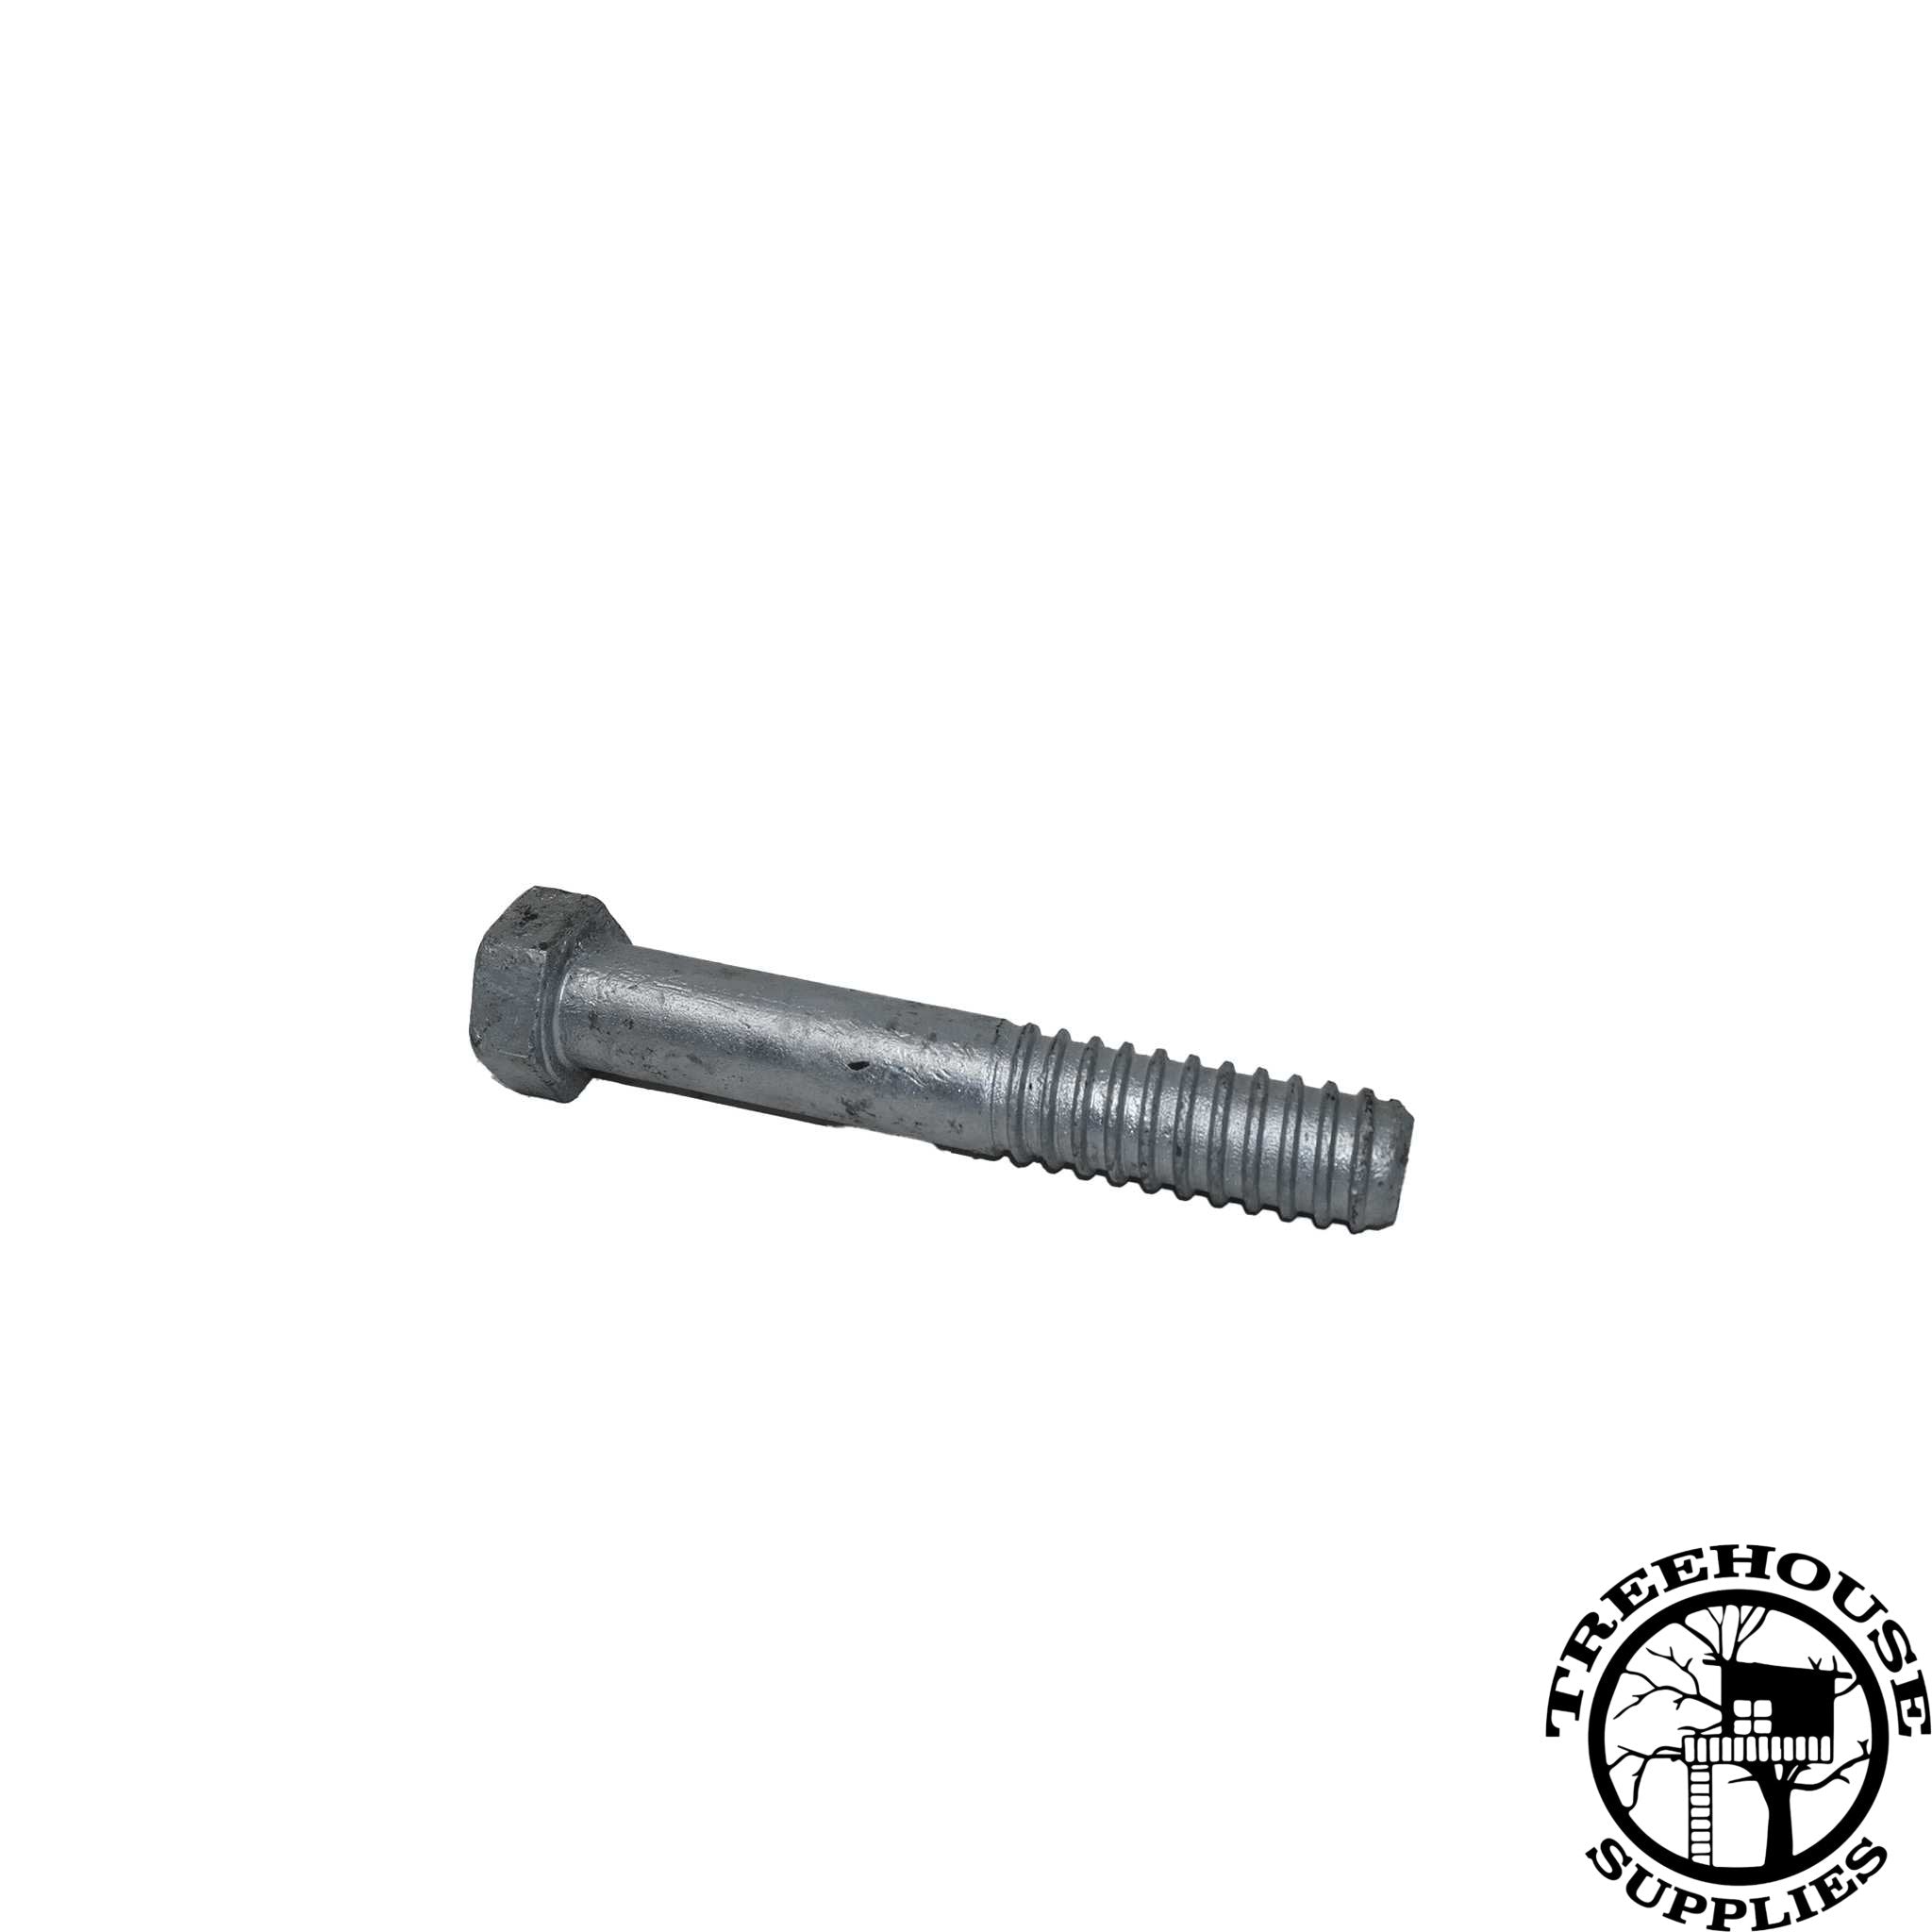 Overhead view of a 1-1/4" X 8" Lag Bolt. White Background.